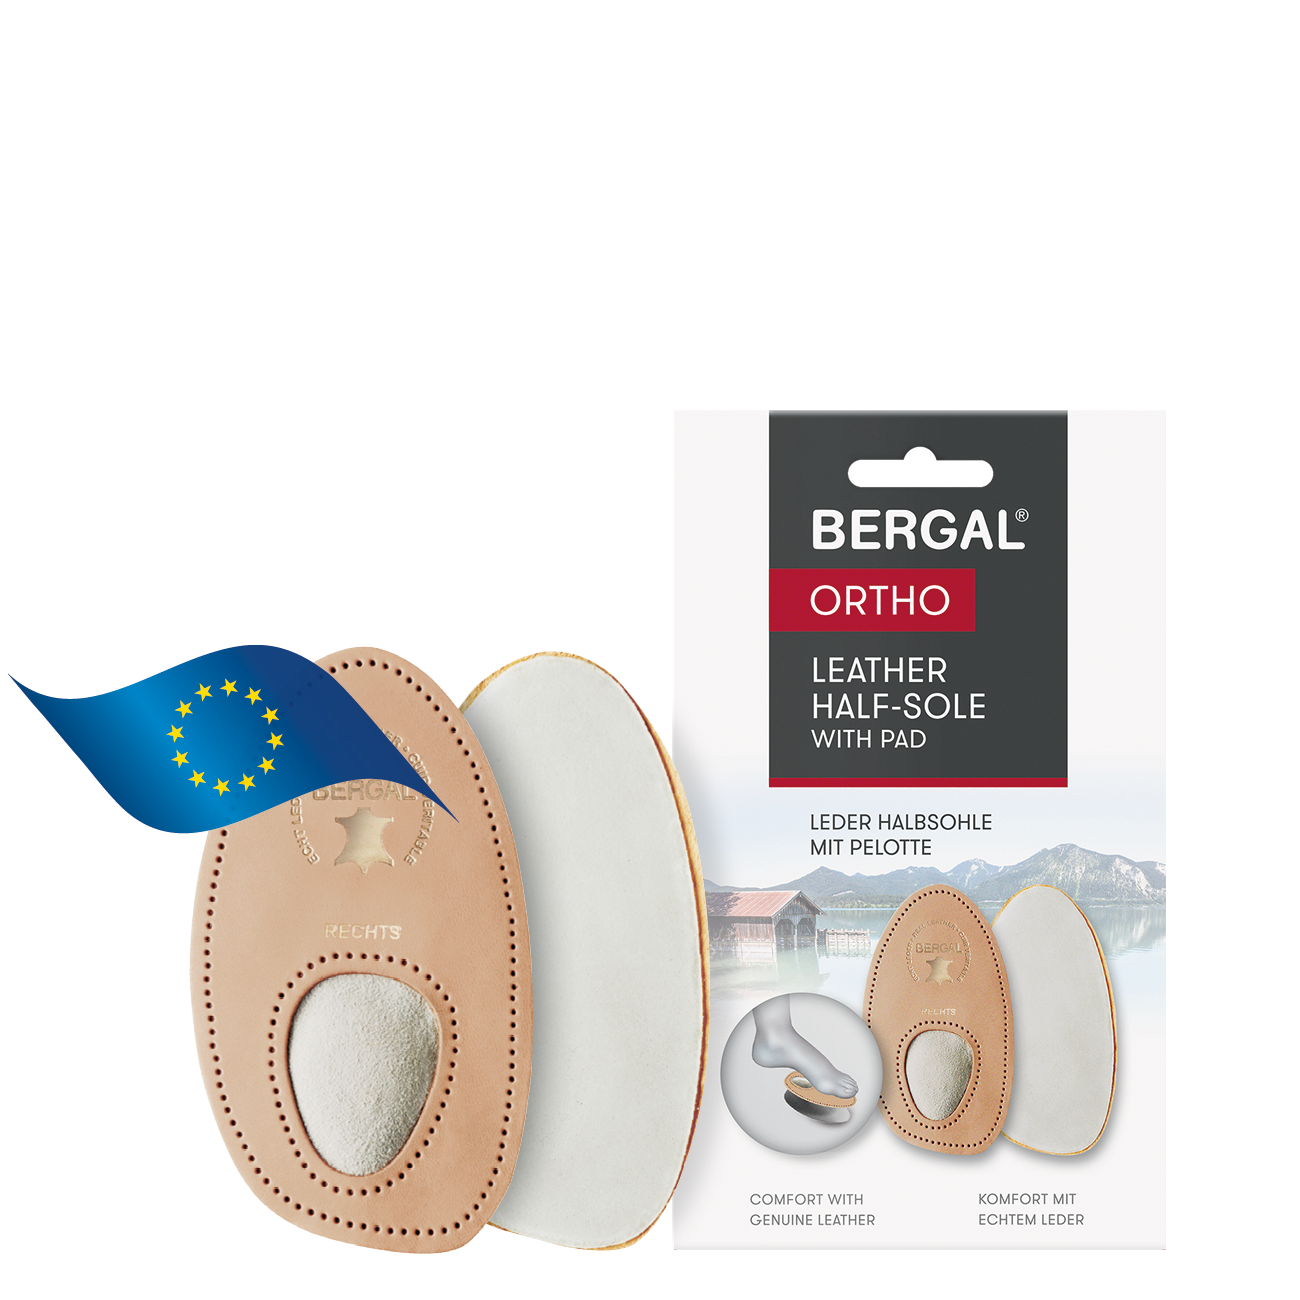 BERGAL LEATHER HALF-SOLE WITH PAD